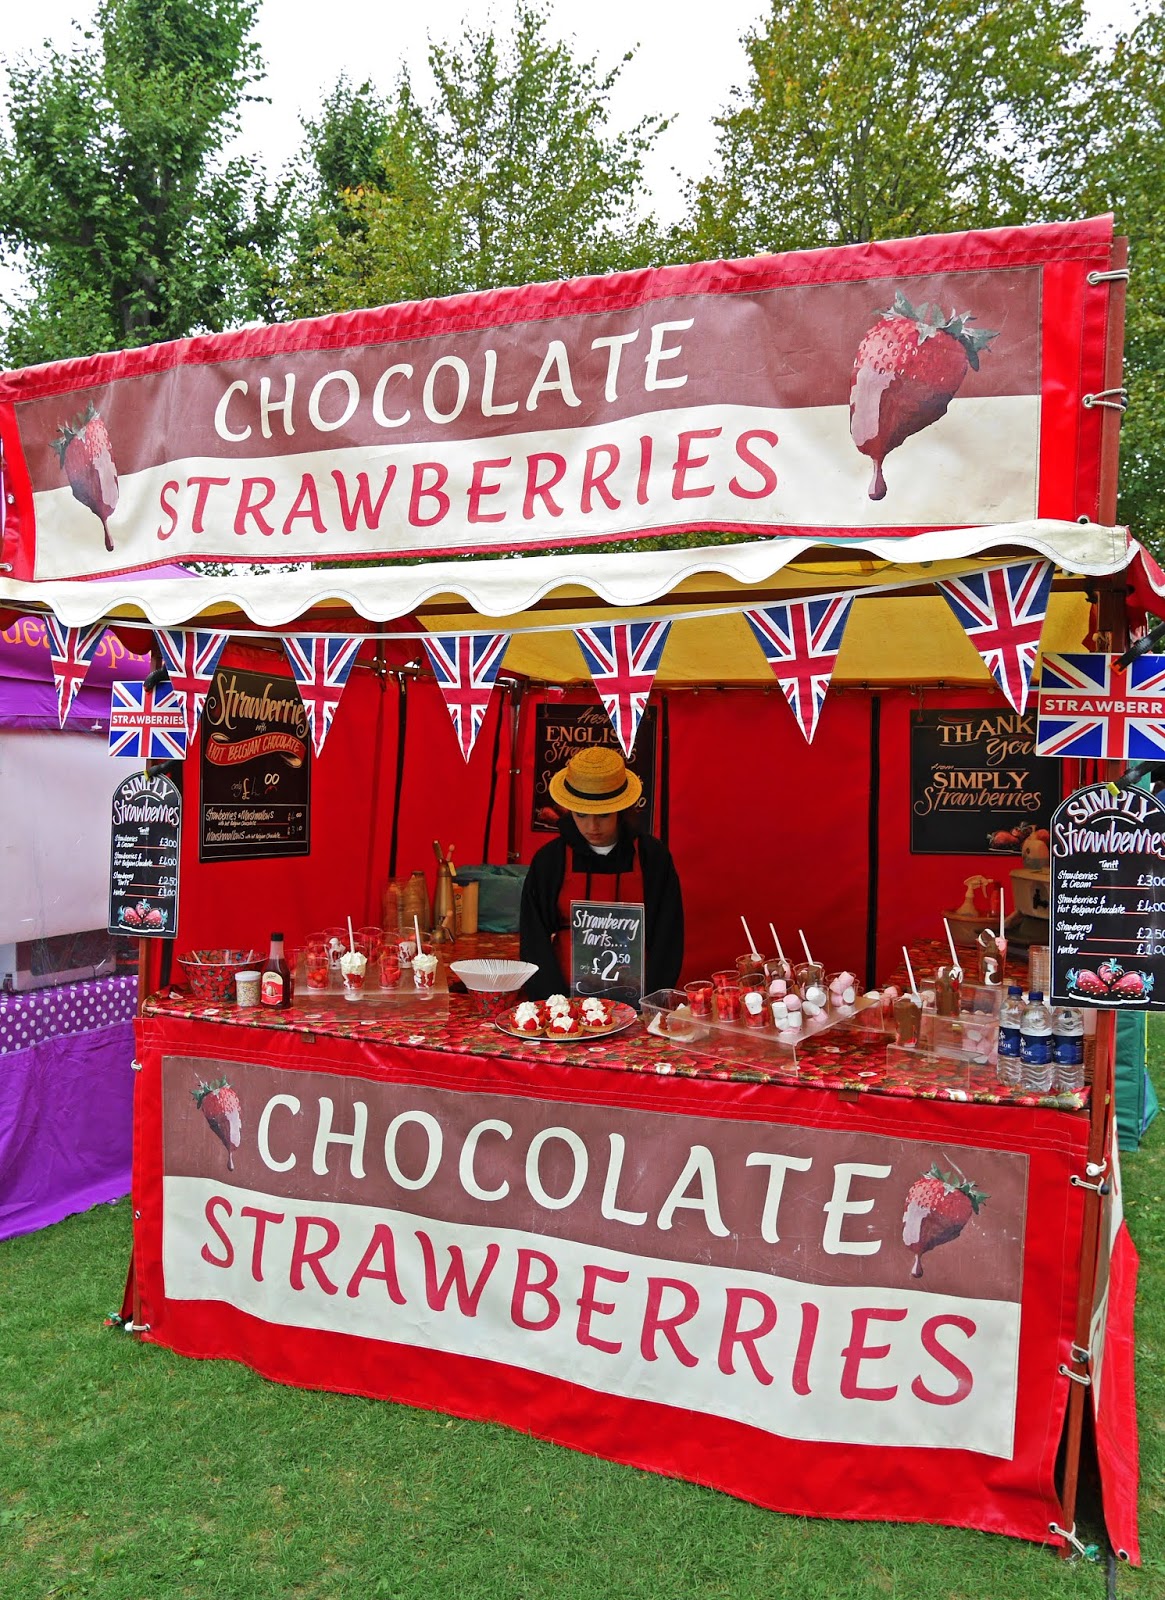 Chocolate Strawberries at the Canterbury Food Festival